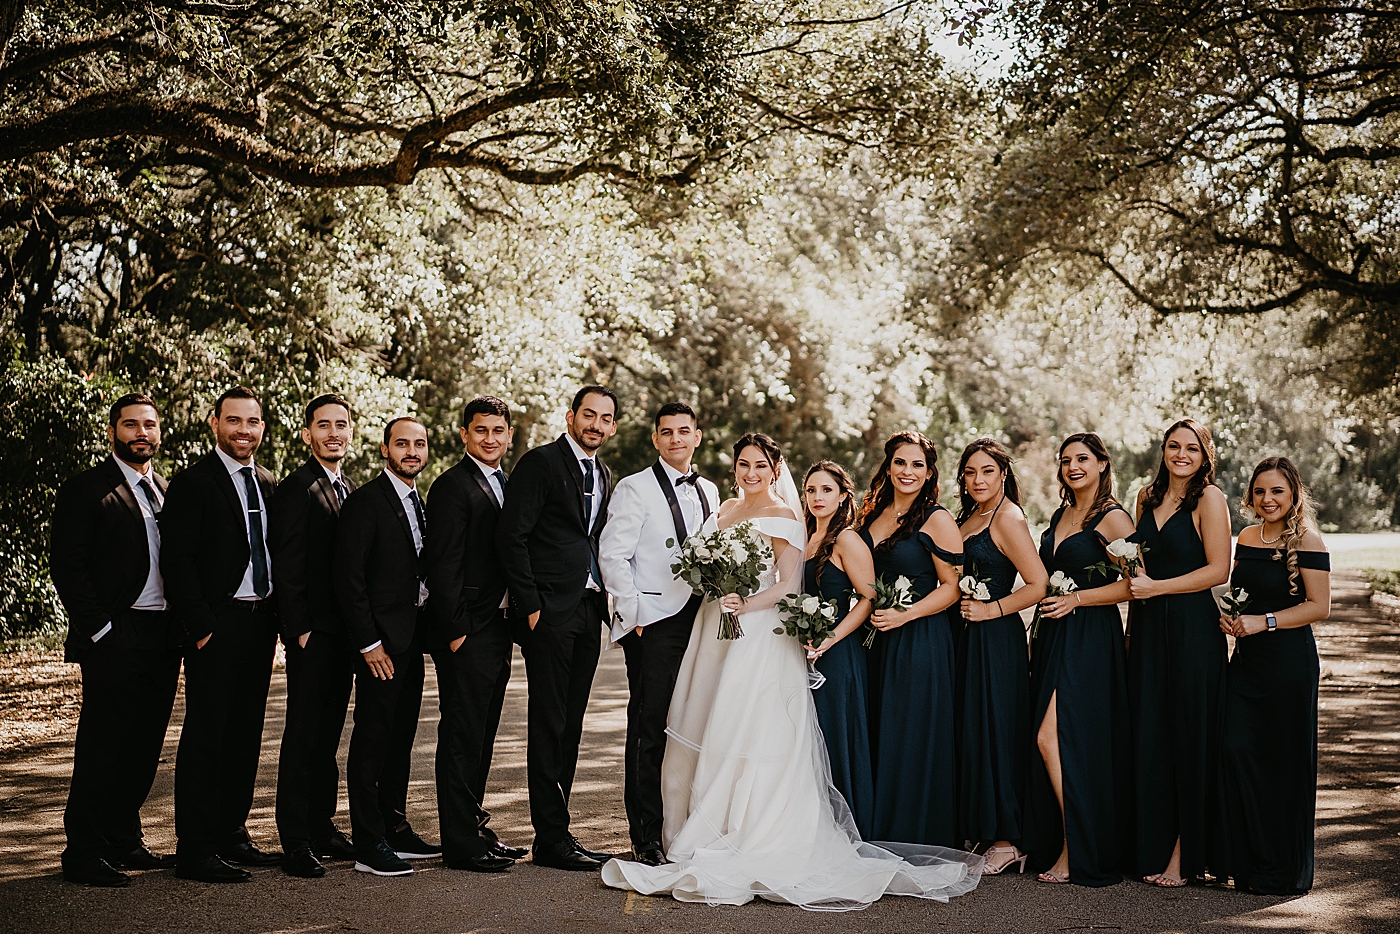 Bride and Groom with entire wedding party portrait Lavan Venue Wedding Photography captured by South Florida Wedding Photographer Krystal Capone Photography